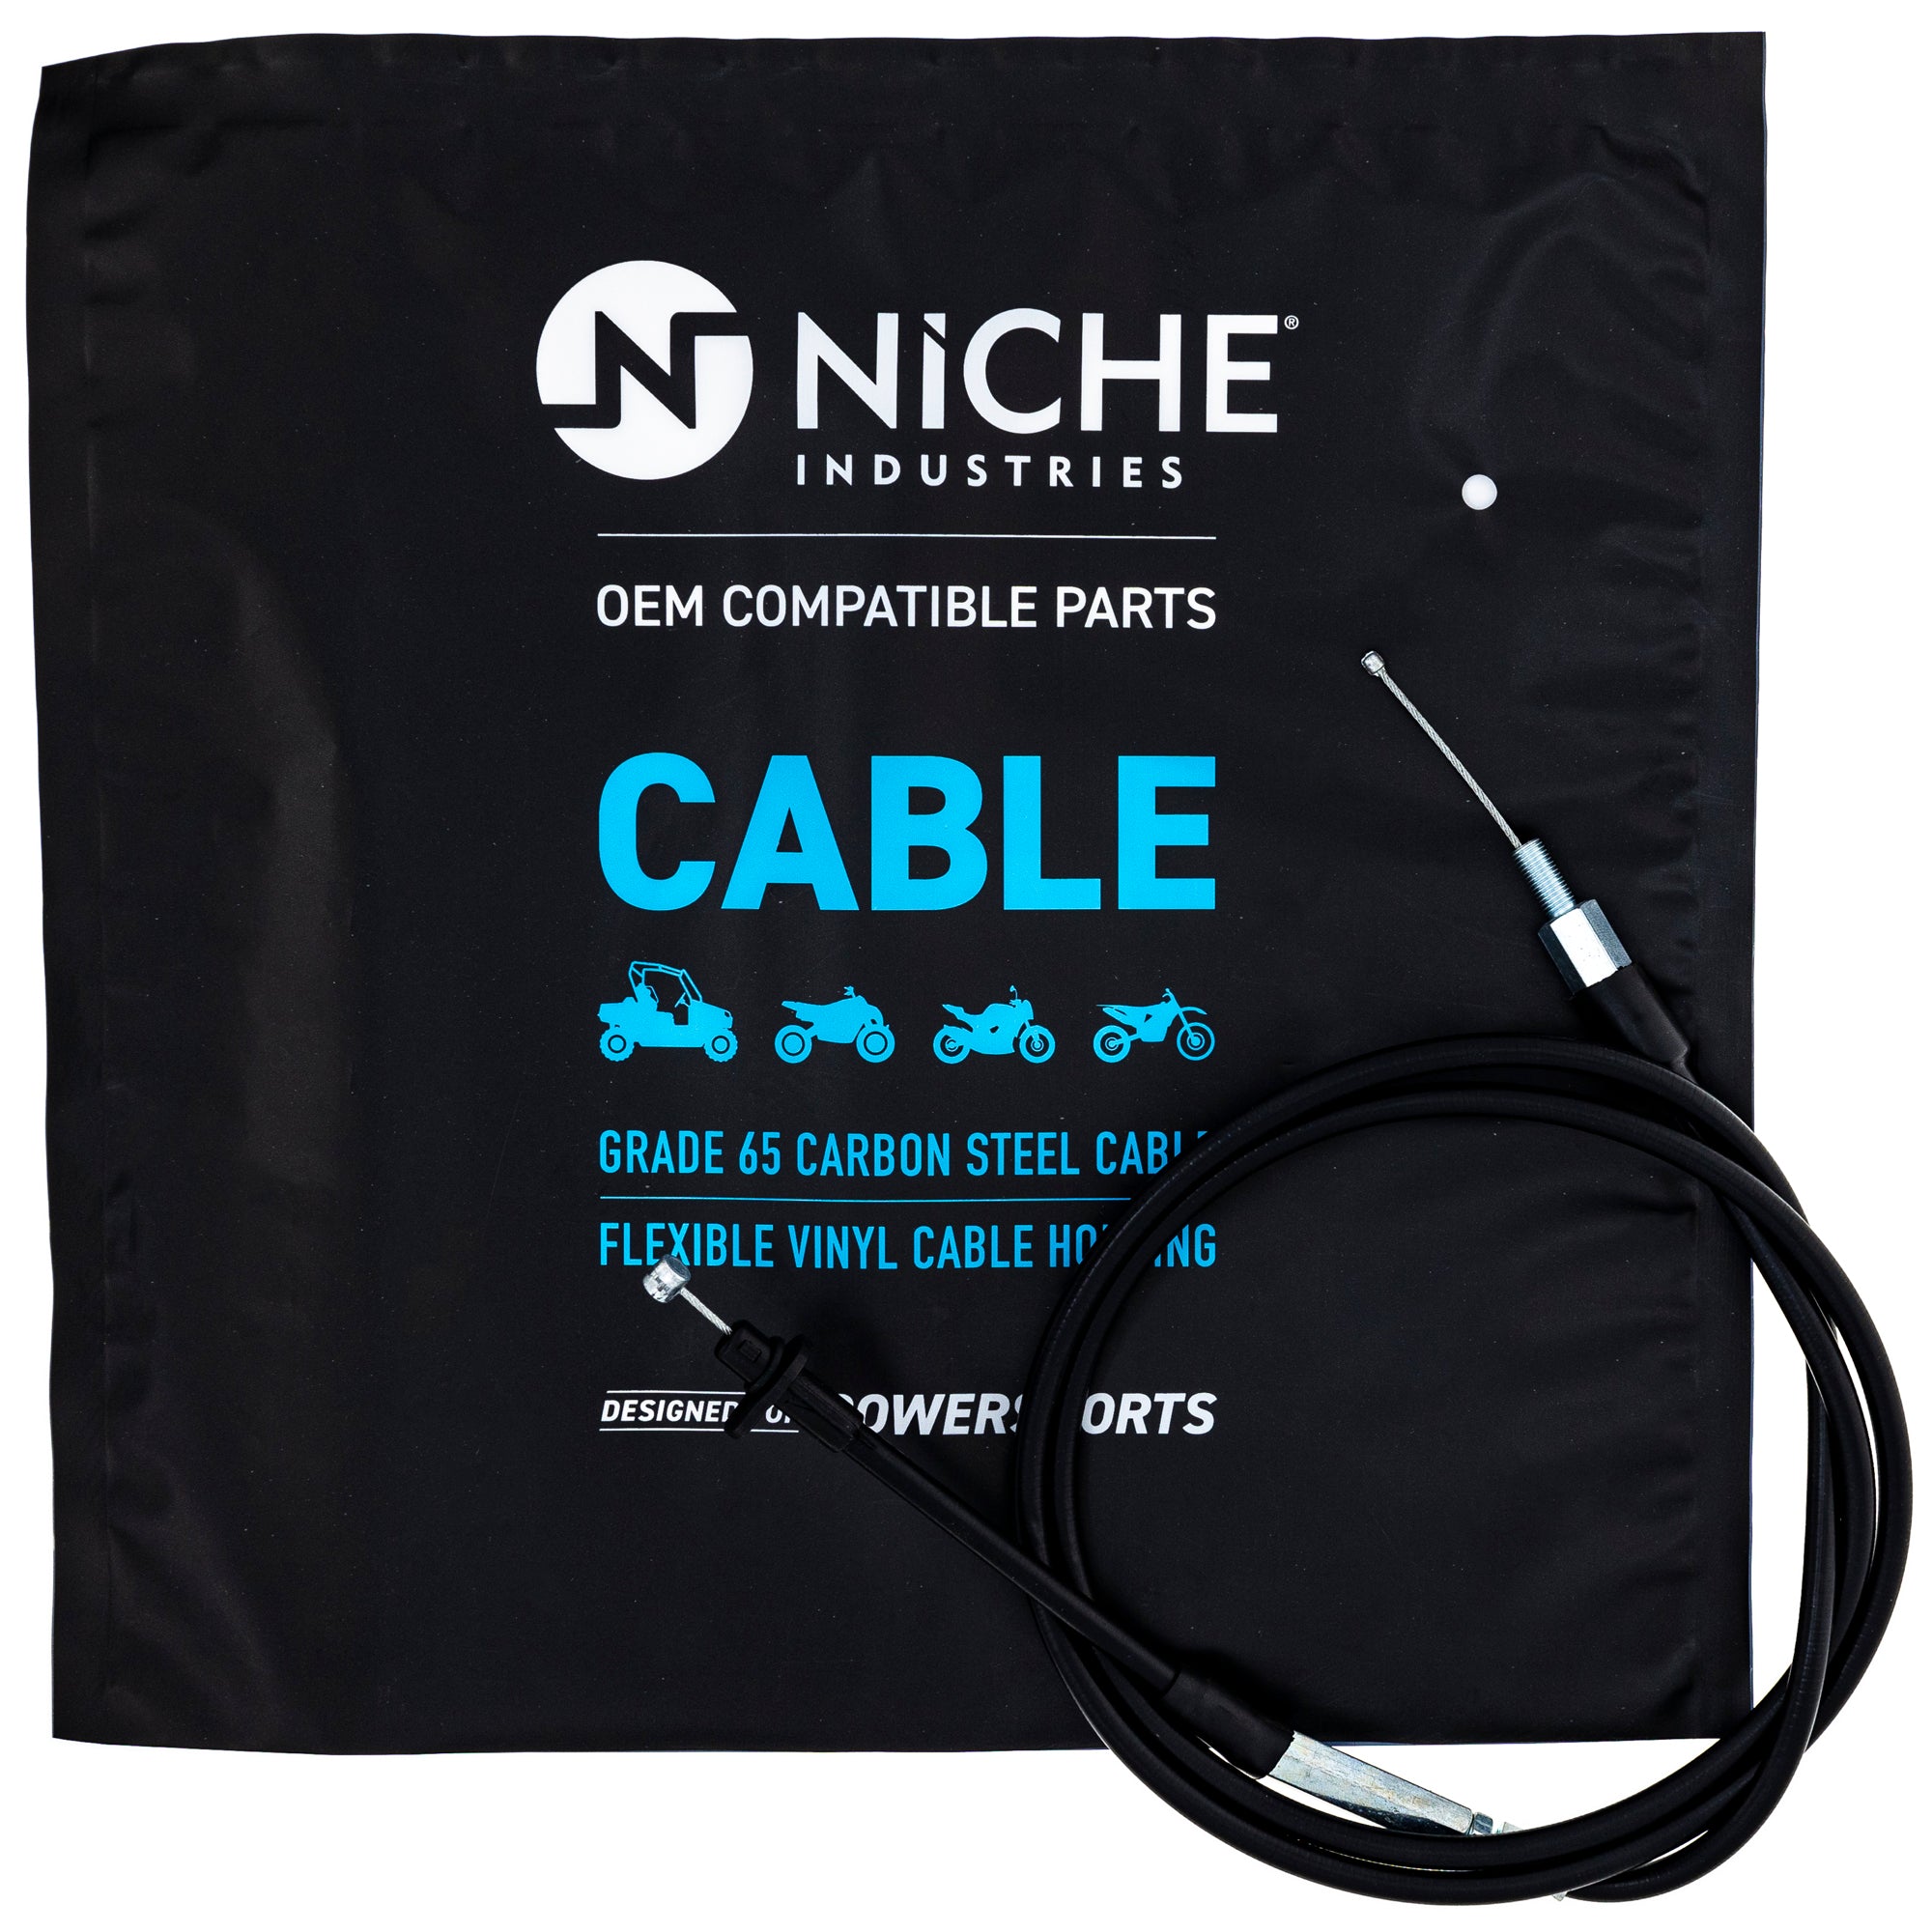 NICHE 519-CCB2284L Throttle Cable for zOTHER Polaris Xpedition Worker